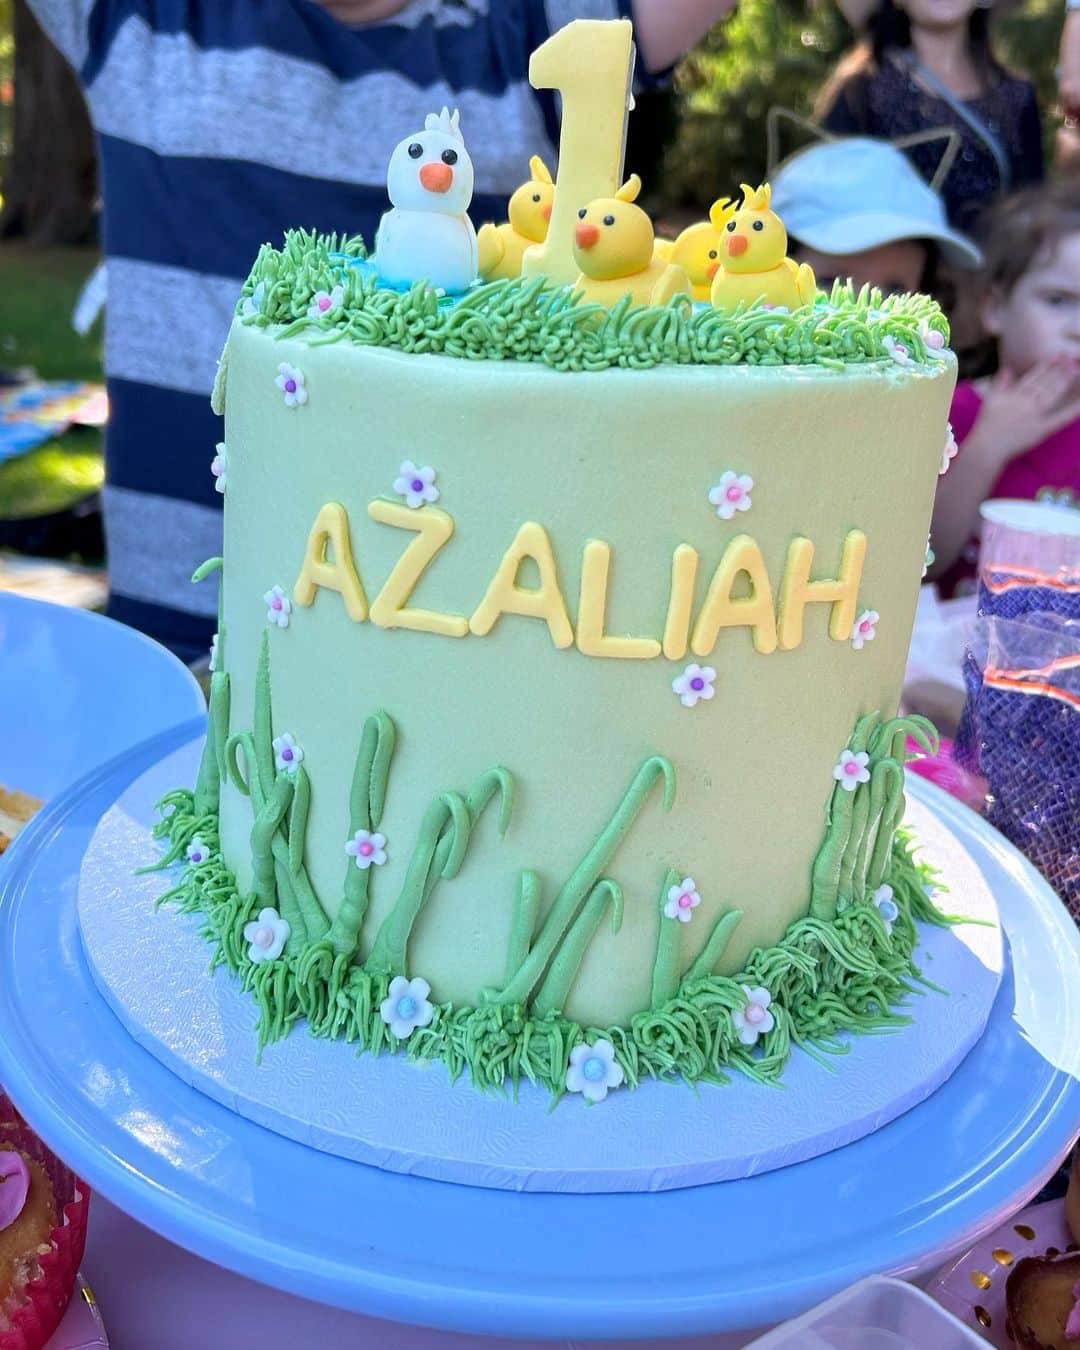 アンジェラ・ペティさんのインスタグラム写真 - (アンジェラ・ペティInstagram)「Happy 1st Birthday to our very precious daughter Azaliah💕💕💕  Being your Mum is the best thing that has ever happened to me!   Can't believe it's a year since your very early arrival into this world, 5 weeks before your due date!   We had a tough start with not being able to be in NICU with you for 5 days, due to your Daddy and I getting covid 2 days after you were born. But we are so thankful that you stayed in good health and it was the best thing ever being reunited 5 days later! We then got to bring you home when you were 3.5 weeks old.   It's been such an incredible journey seeing you grow and learn each day.  Although you haven't been the best sleeper, and there have been some challenges along the way, there have been so many amazing moments!  We love seeing you develop and your sweet, kind, playful, cuddly, inquisitive, stubborn-at-times personality blossom!   You're doing so well with your milestones and have started standing up without holding onto things in the last couple weeks and taking the odd stop so we don't think it'll be long until you're walking by yourself!  Excited to spend a couple days away camping for the first time with you! ♥️♥️  We absolutely love being your parents and you have already taught us so much♥️  Looking forward to all of the adventures to come 💕  Photos from the day you were born and photos from over the last couple weeks including your birthday party last week! 🌸」3月23日 11時33分 - angie_run800m